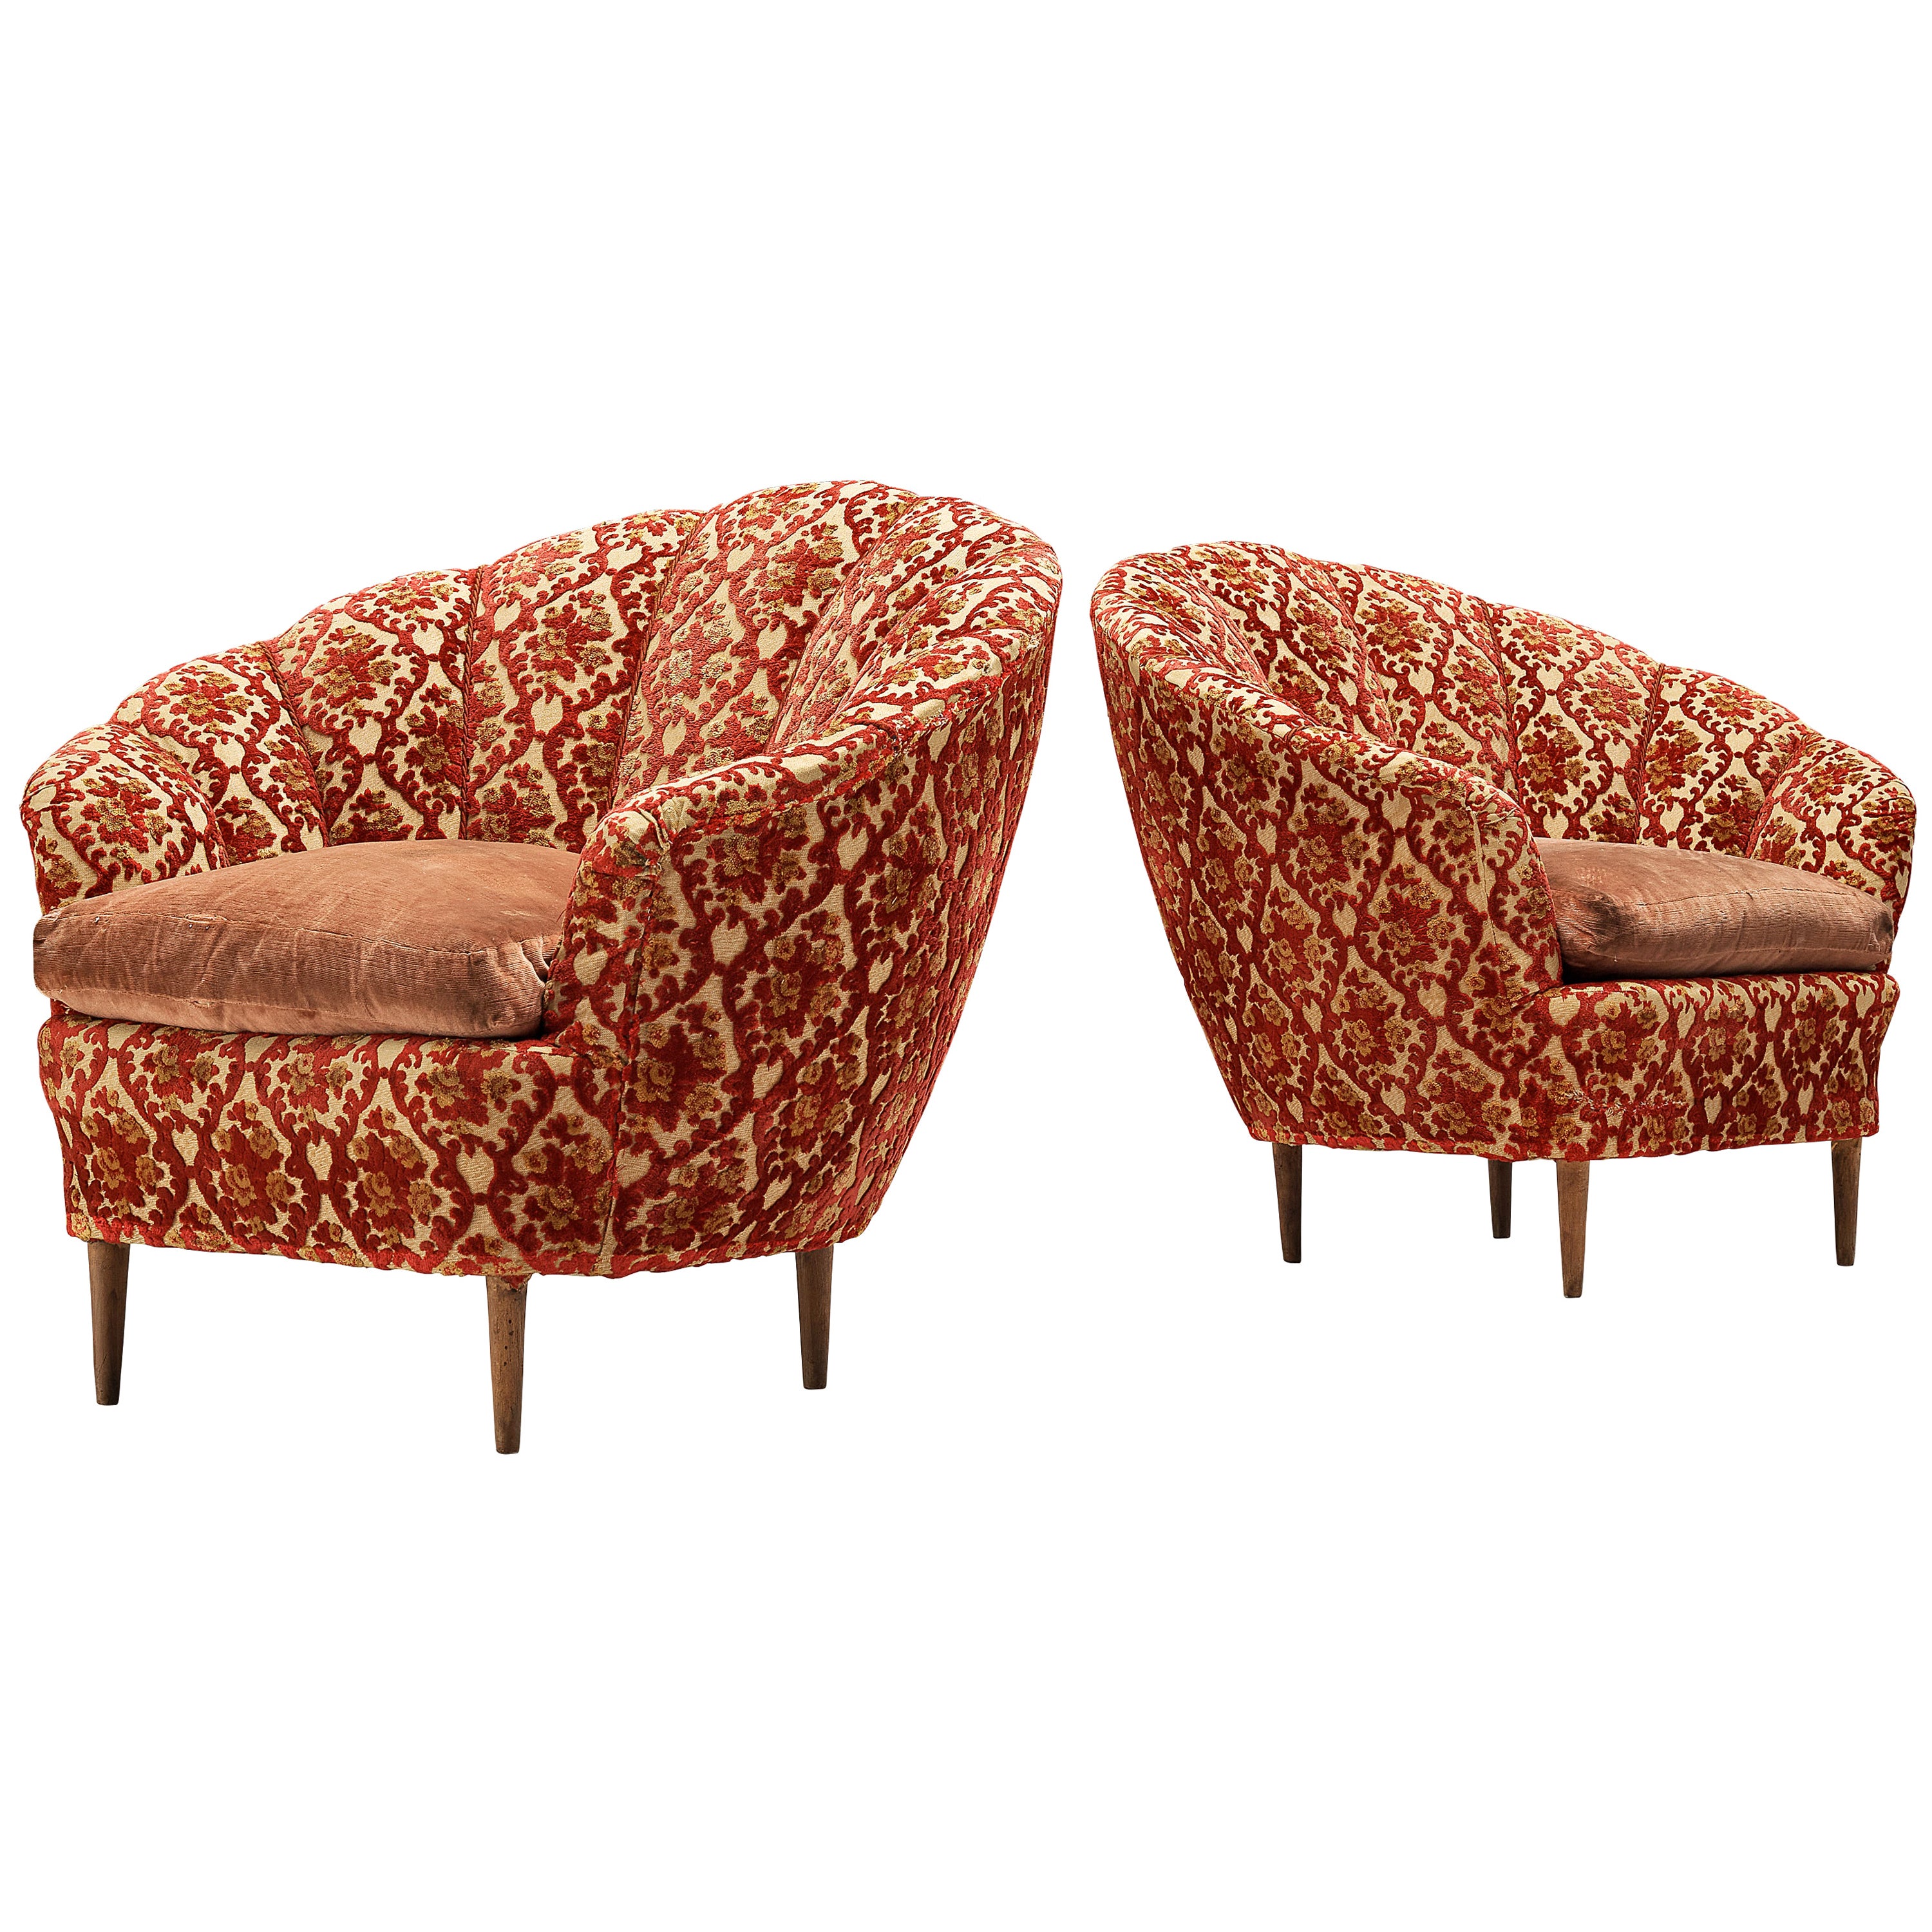 Elegant Curved Club Chairs in Floral Upholstery